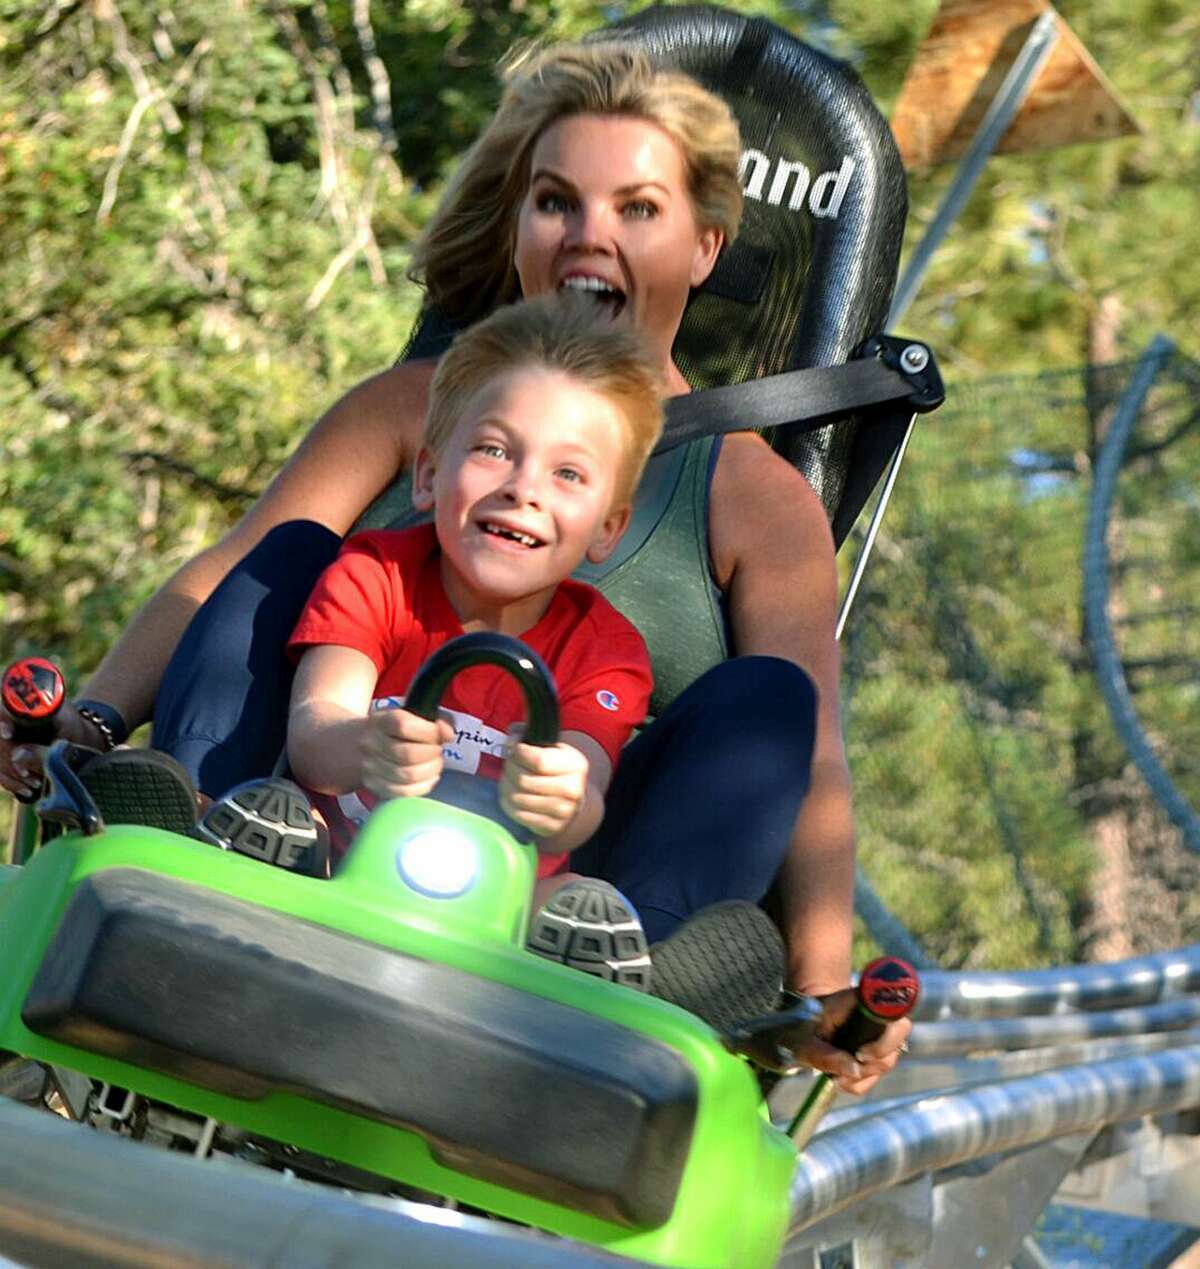 Aerie's Resort in Grafton has opened the first-ever alpine coaster in Illinois. A ribbon cutting ceremony for the 3,000-foot railed coaster is planned Oct. 11. in Grafton.